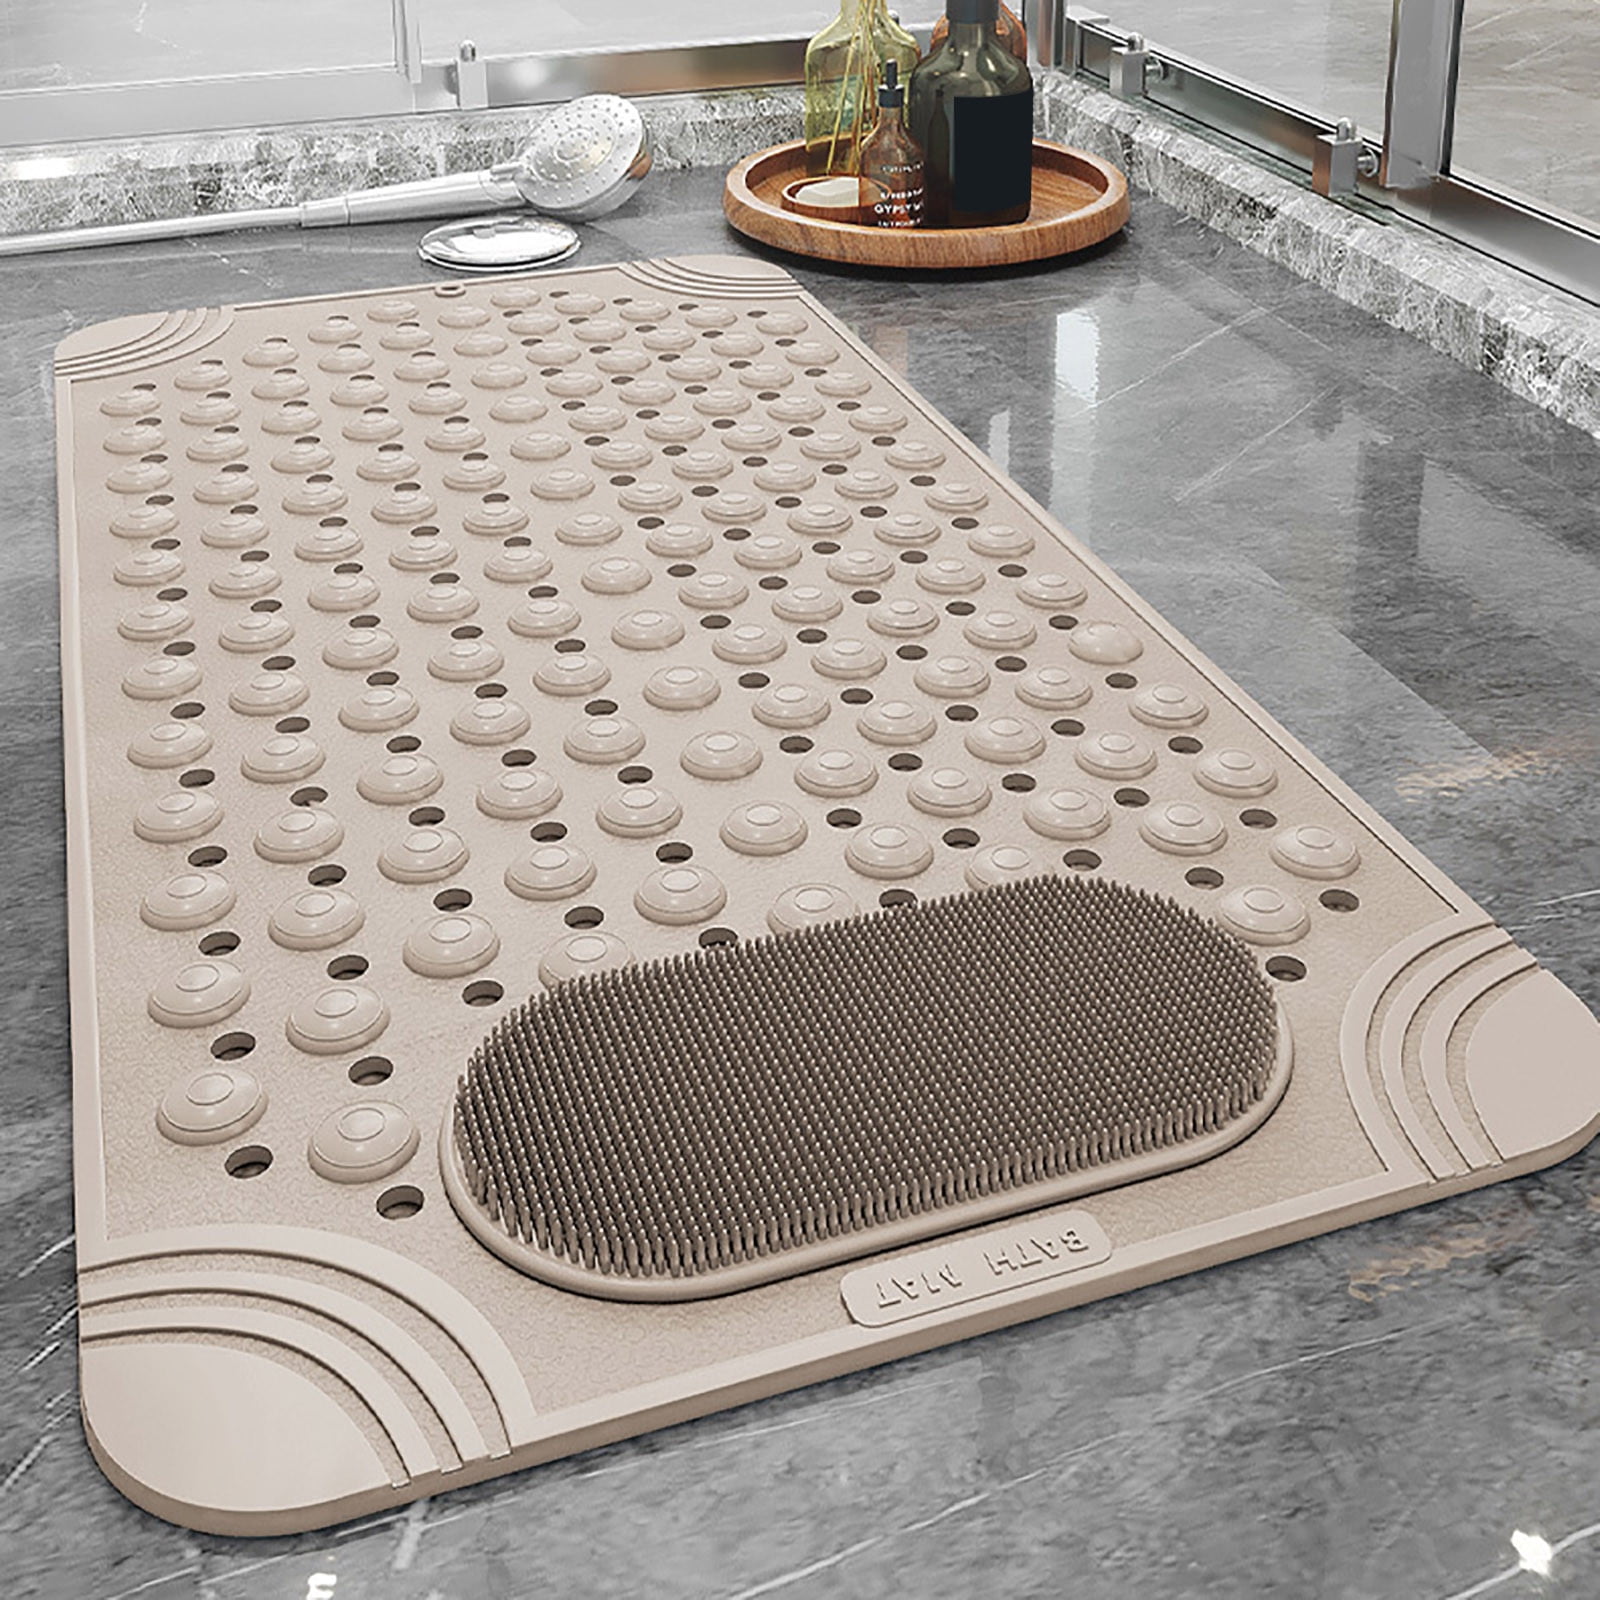 Semfri Round Non Slip Shower Mat 22 x 22 Inches Textured Surface Anti Slip Bath Mats with Drain Hole in Middle Bathroom Bath Massage Foot Mat for